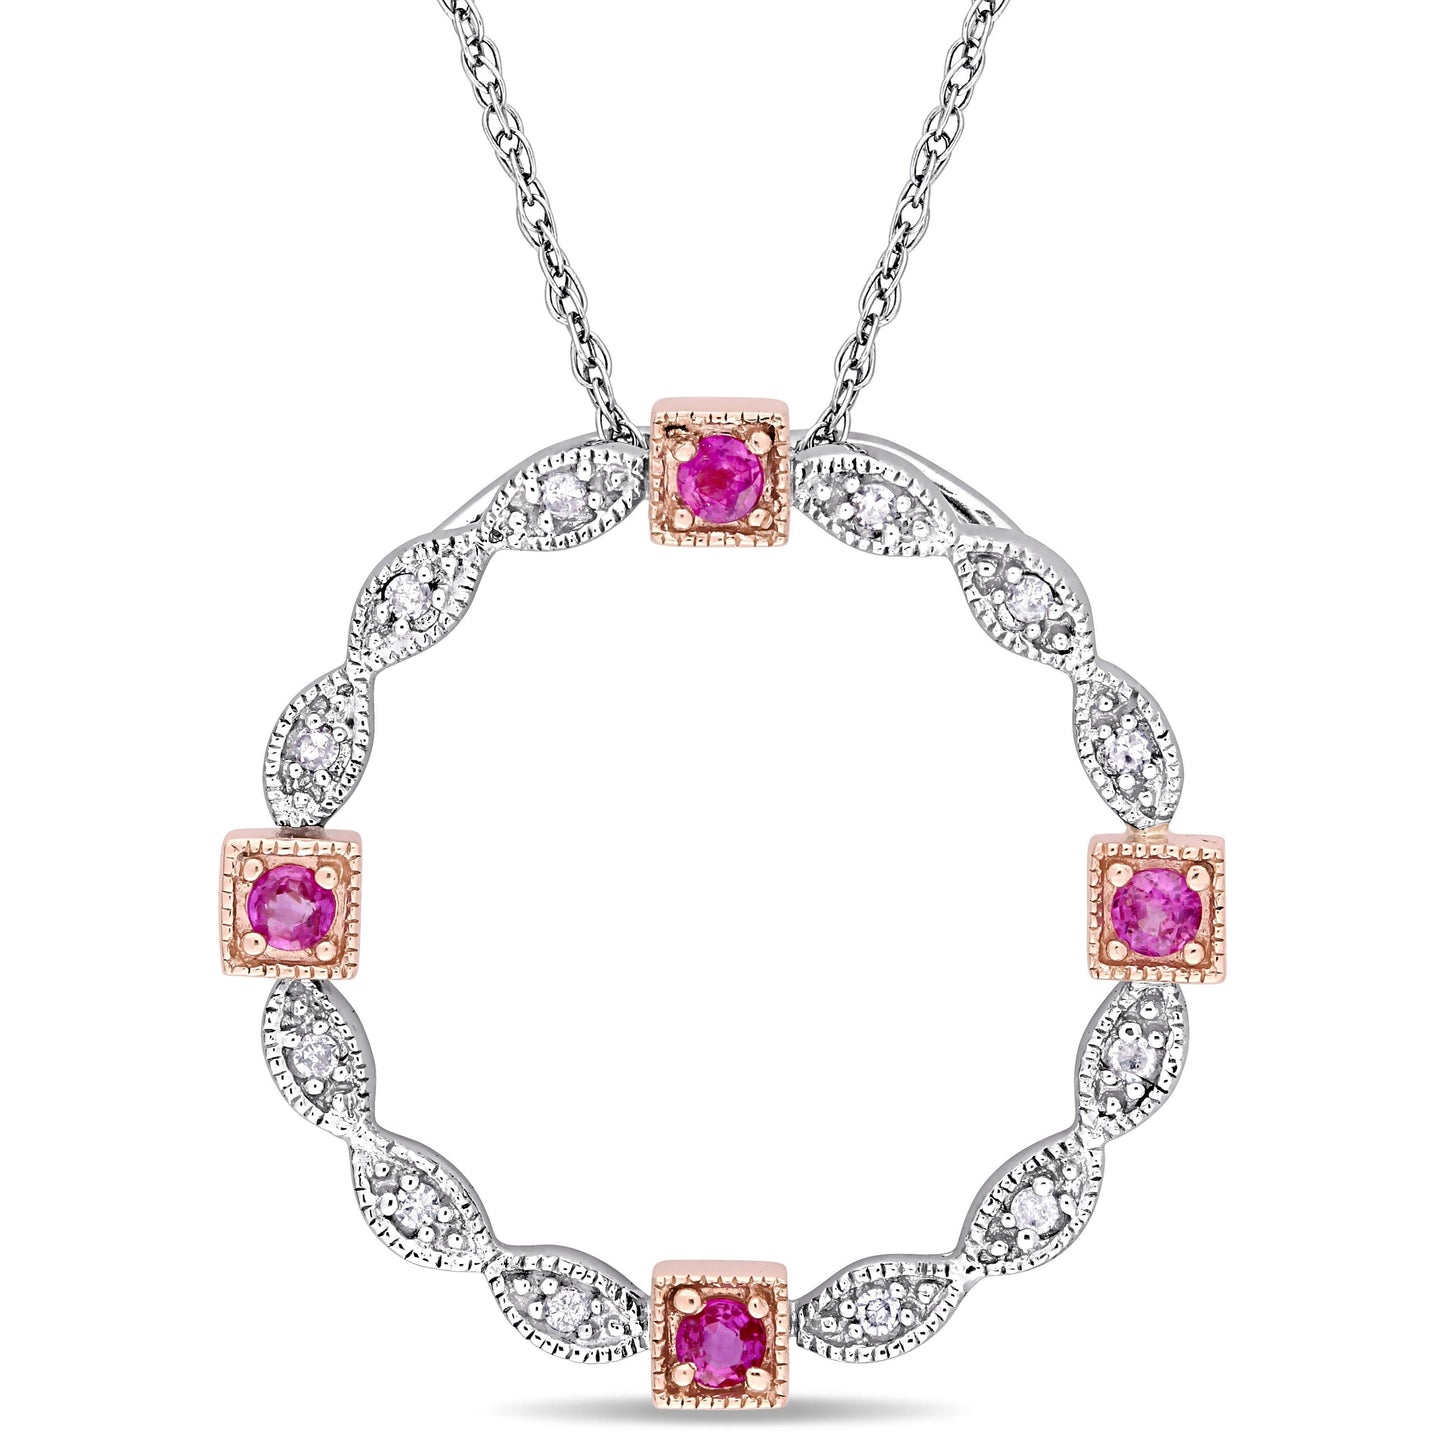 Sophia B Pink Sapphire & Diamond Accent Vintage Necklace in 2-Tone Gold